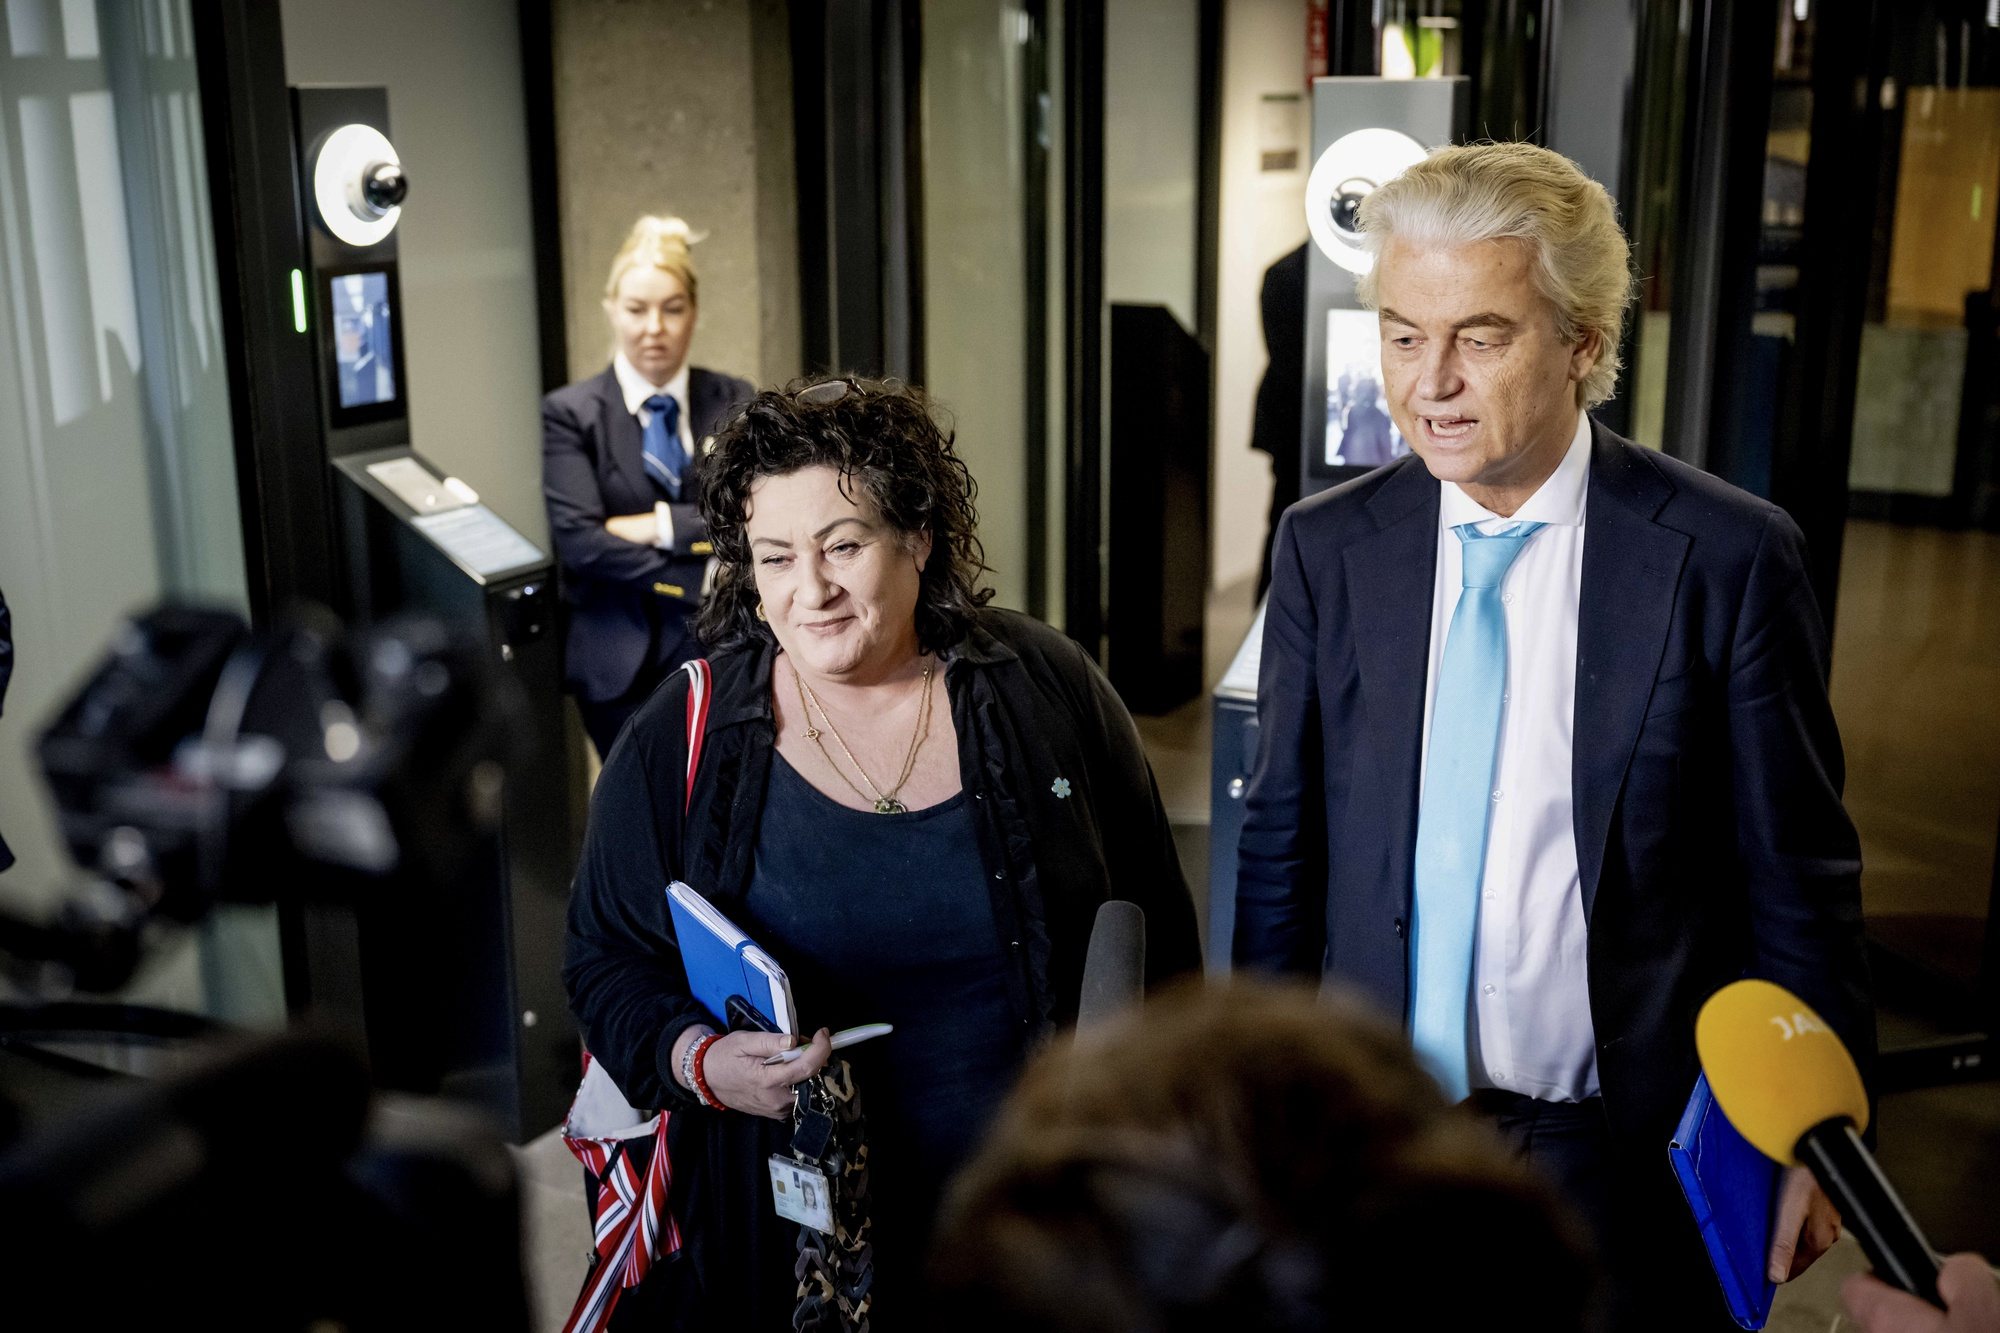 epa11403712 Party for Freedom (PVV) leader Geert Wilders  (R) and Farmer-Citizen Movement (BBB) party leader Caroline van der Plas (L) speak to the press after formation talks with the coalition parties PVV, VVD, NSC, BBB and formateur Richard van Zwol (not pictured) and prospective Prime Minister Dick Schoof (not pictured) in the Hague, the Netherlands, 11 June 2024. After weeks of consultation, the four parties PVV, VVD, NSC and BBB have reached an agreement on the distribution of cabinet posts. Former top civil servant Dick Schoof is set to become prime minister of the new government. Wilders has announced that the assigning of cabinet posts is completed.  EPA/ROBIN UTRECHT